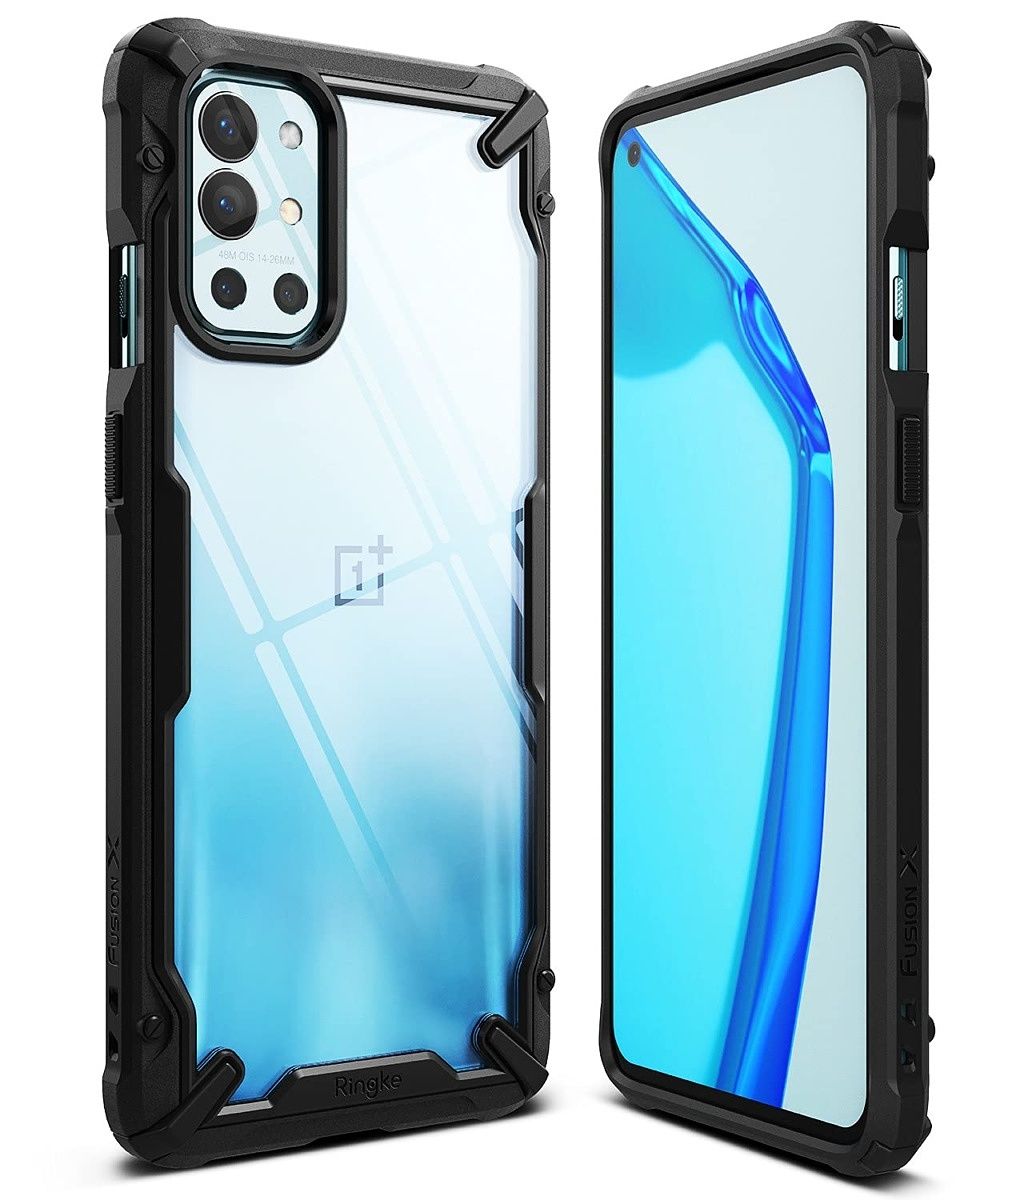 If you want a case with a transparent back, this case from Ringke has you covered. The sides are impact-resistant and can protect against hard drops as well.